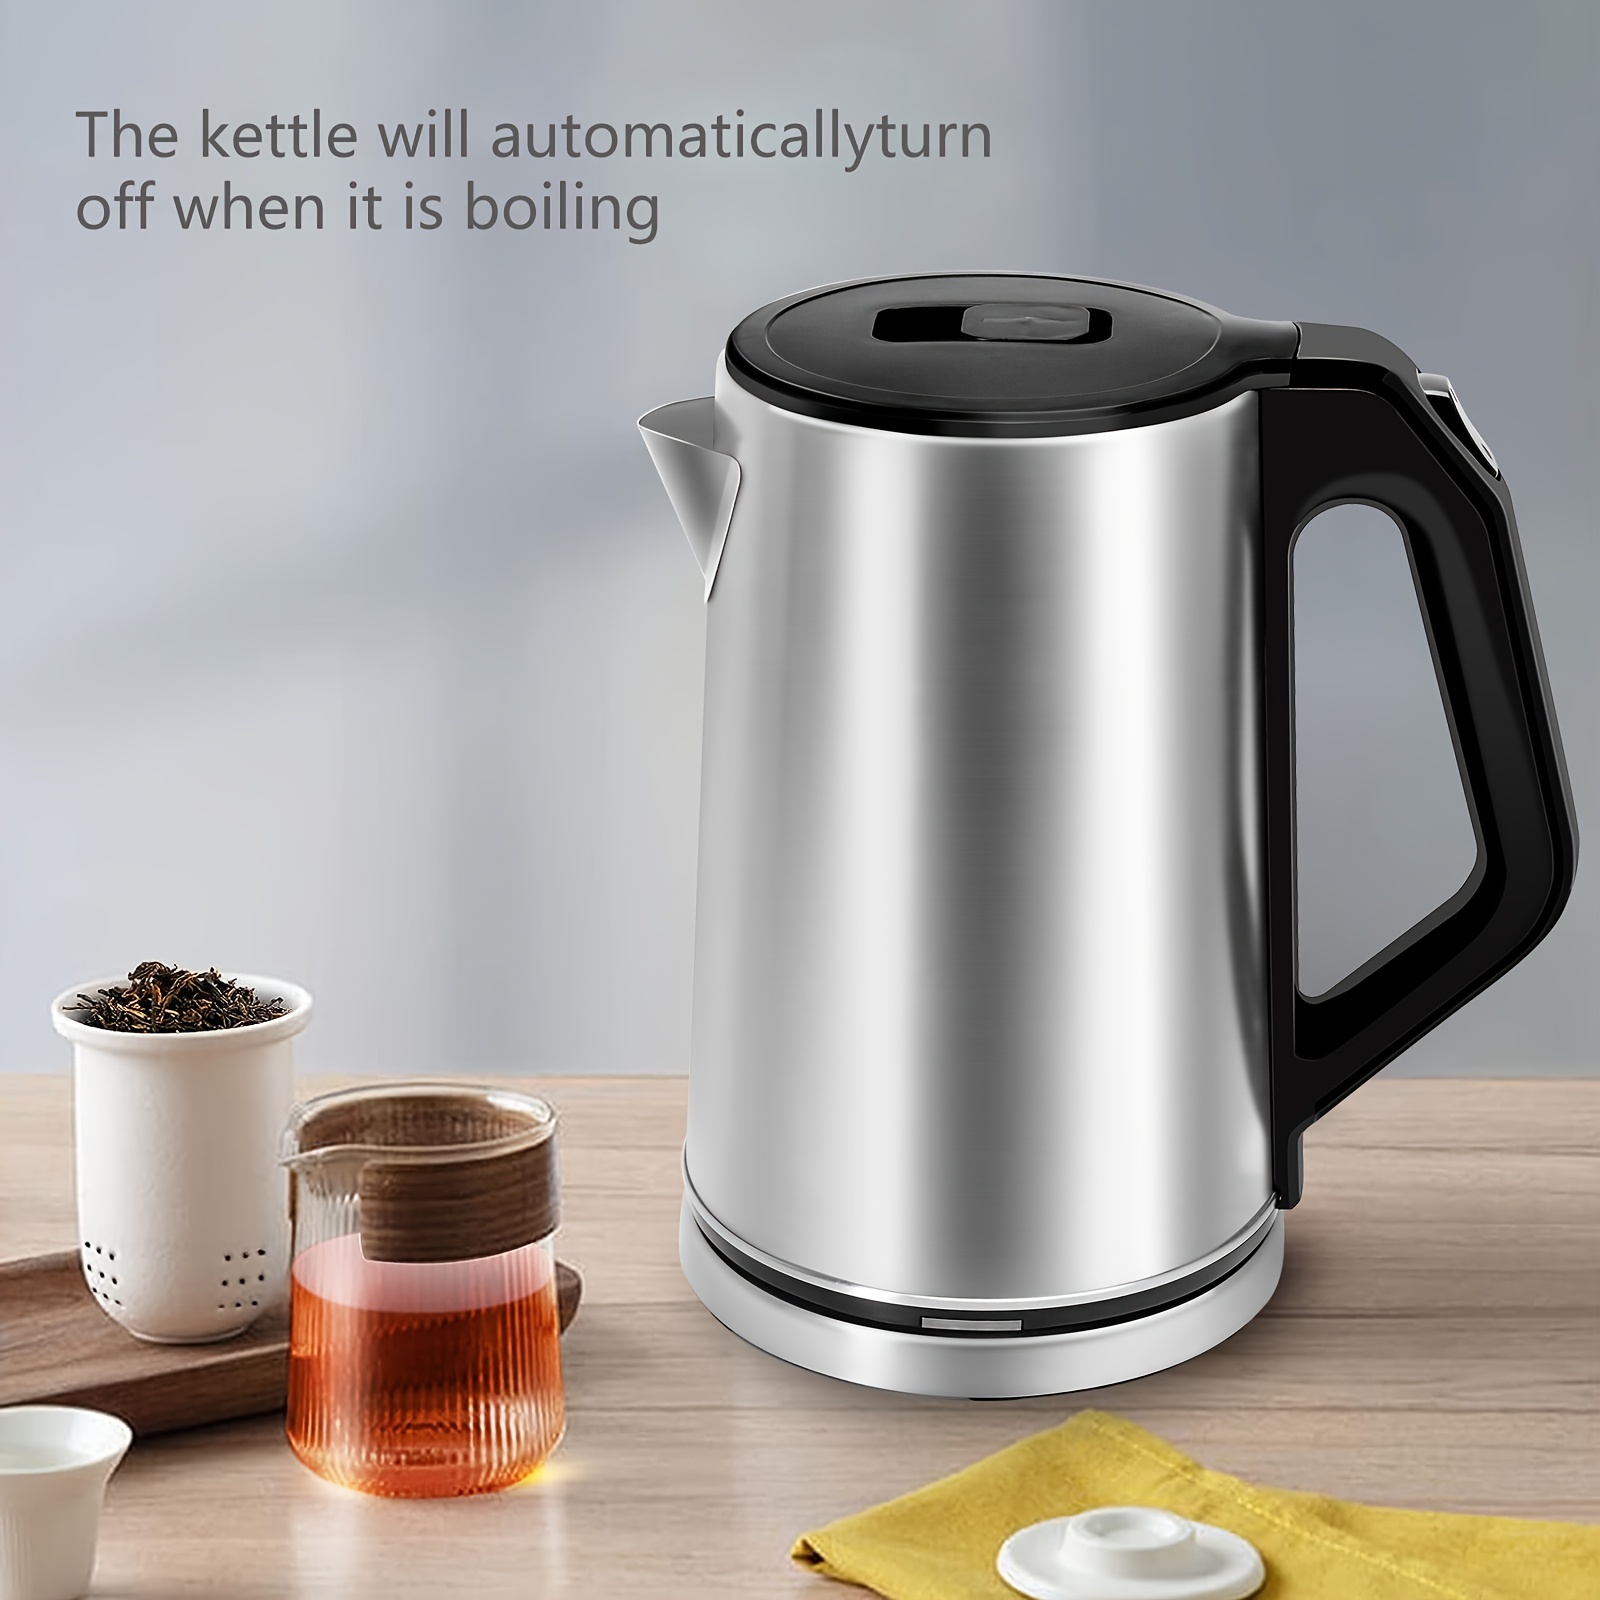 New XIAOMI MIJIA Smart Electric Water Kettle 2 Pro Fast Hot boiling  Stainless Teapot LED Display